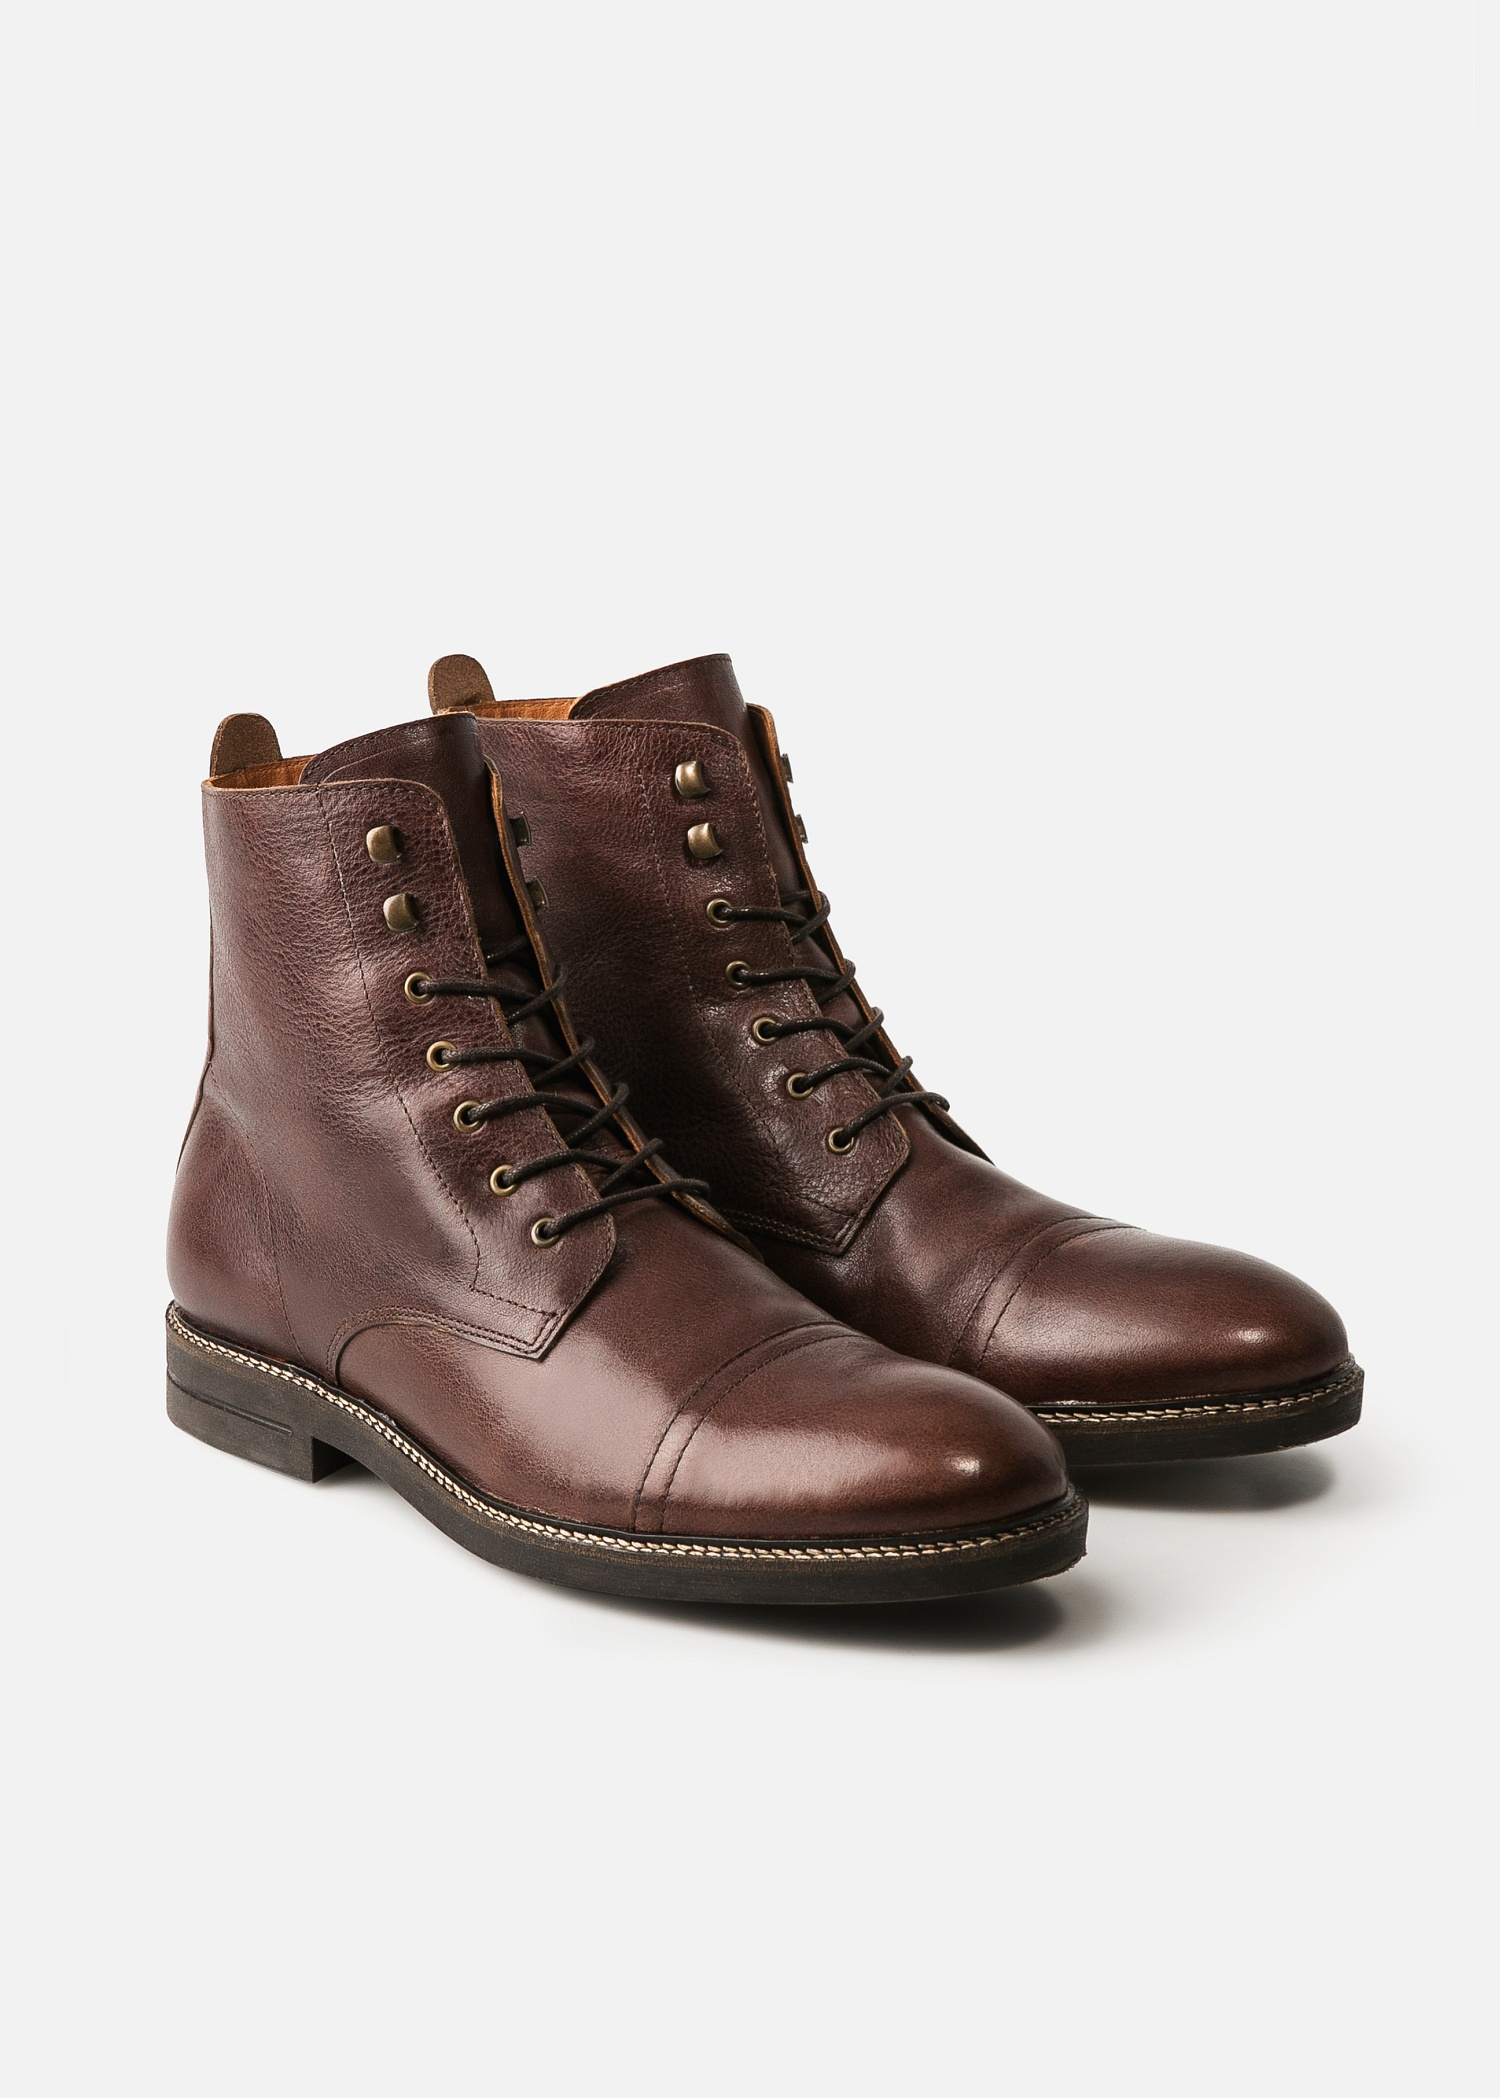 Mango Laceup Leather Boots in Chocolate (Brown) for Men - Lyst